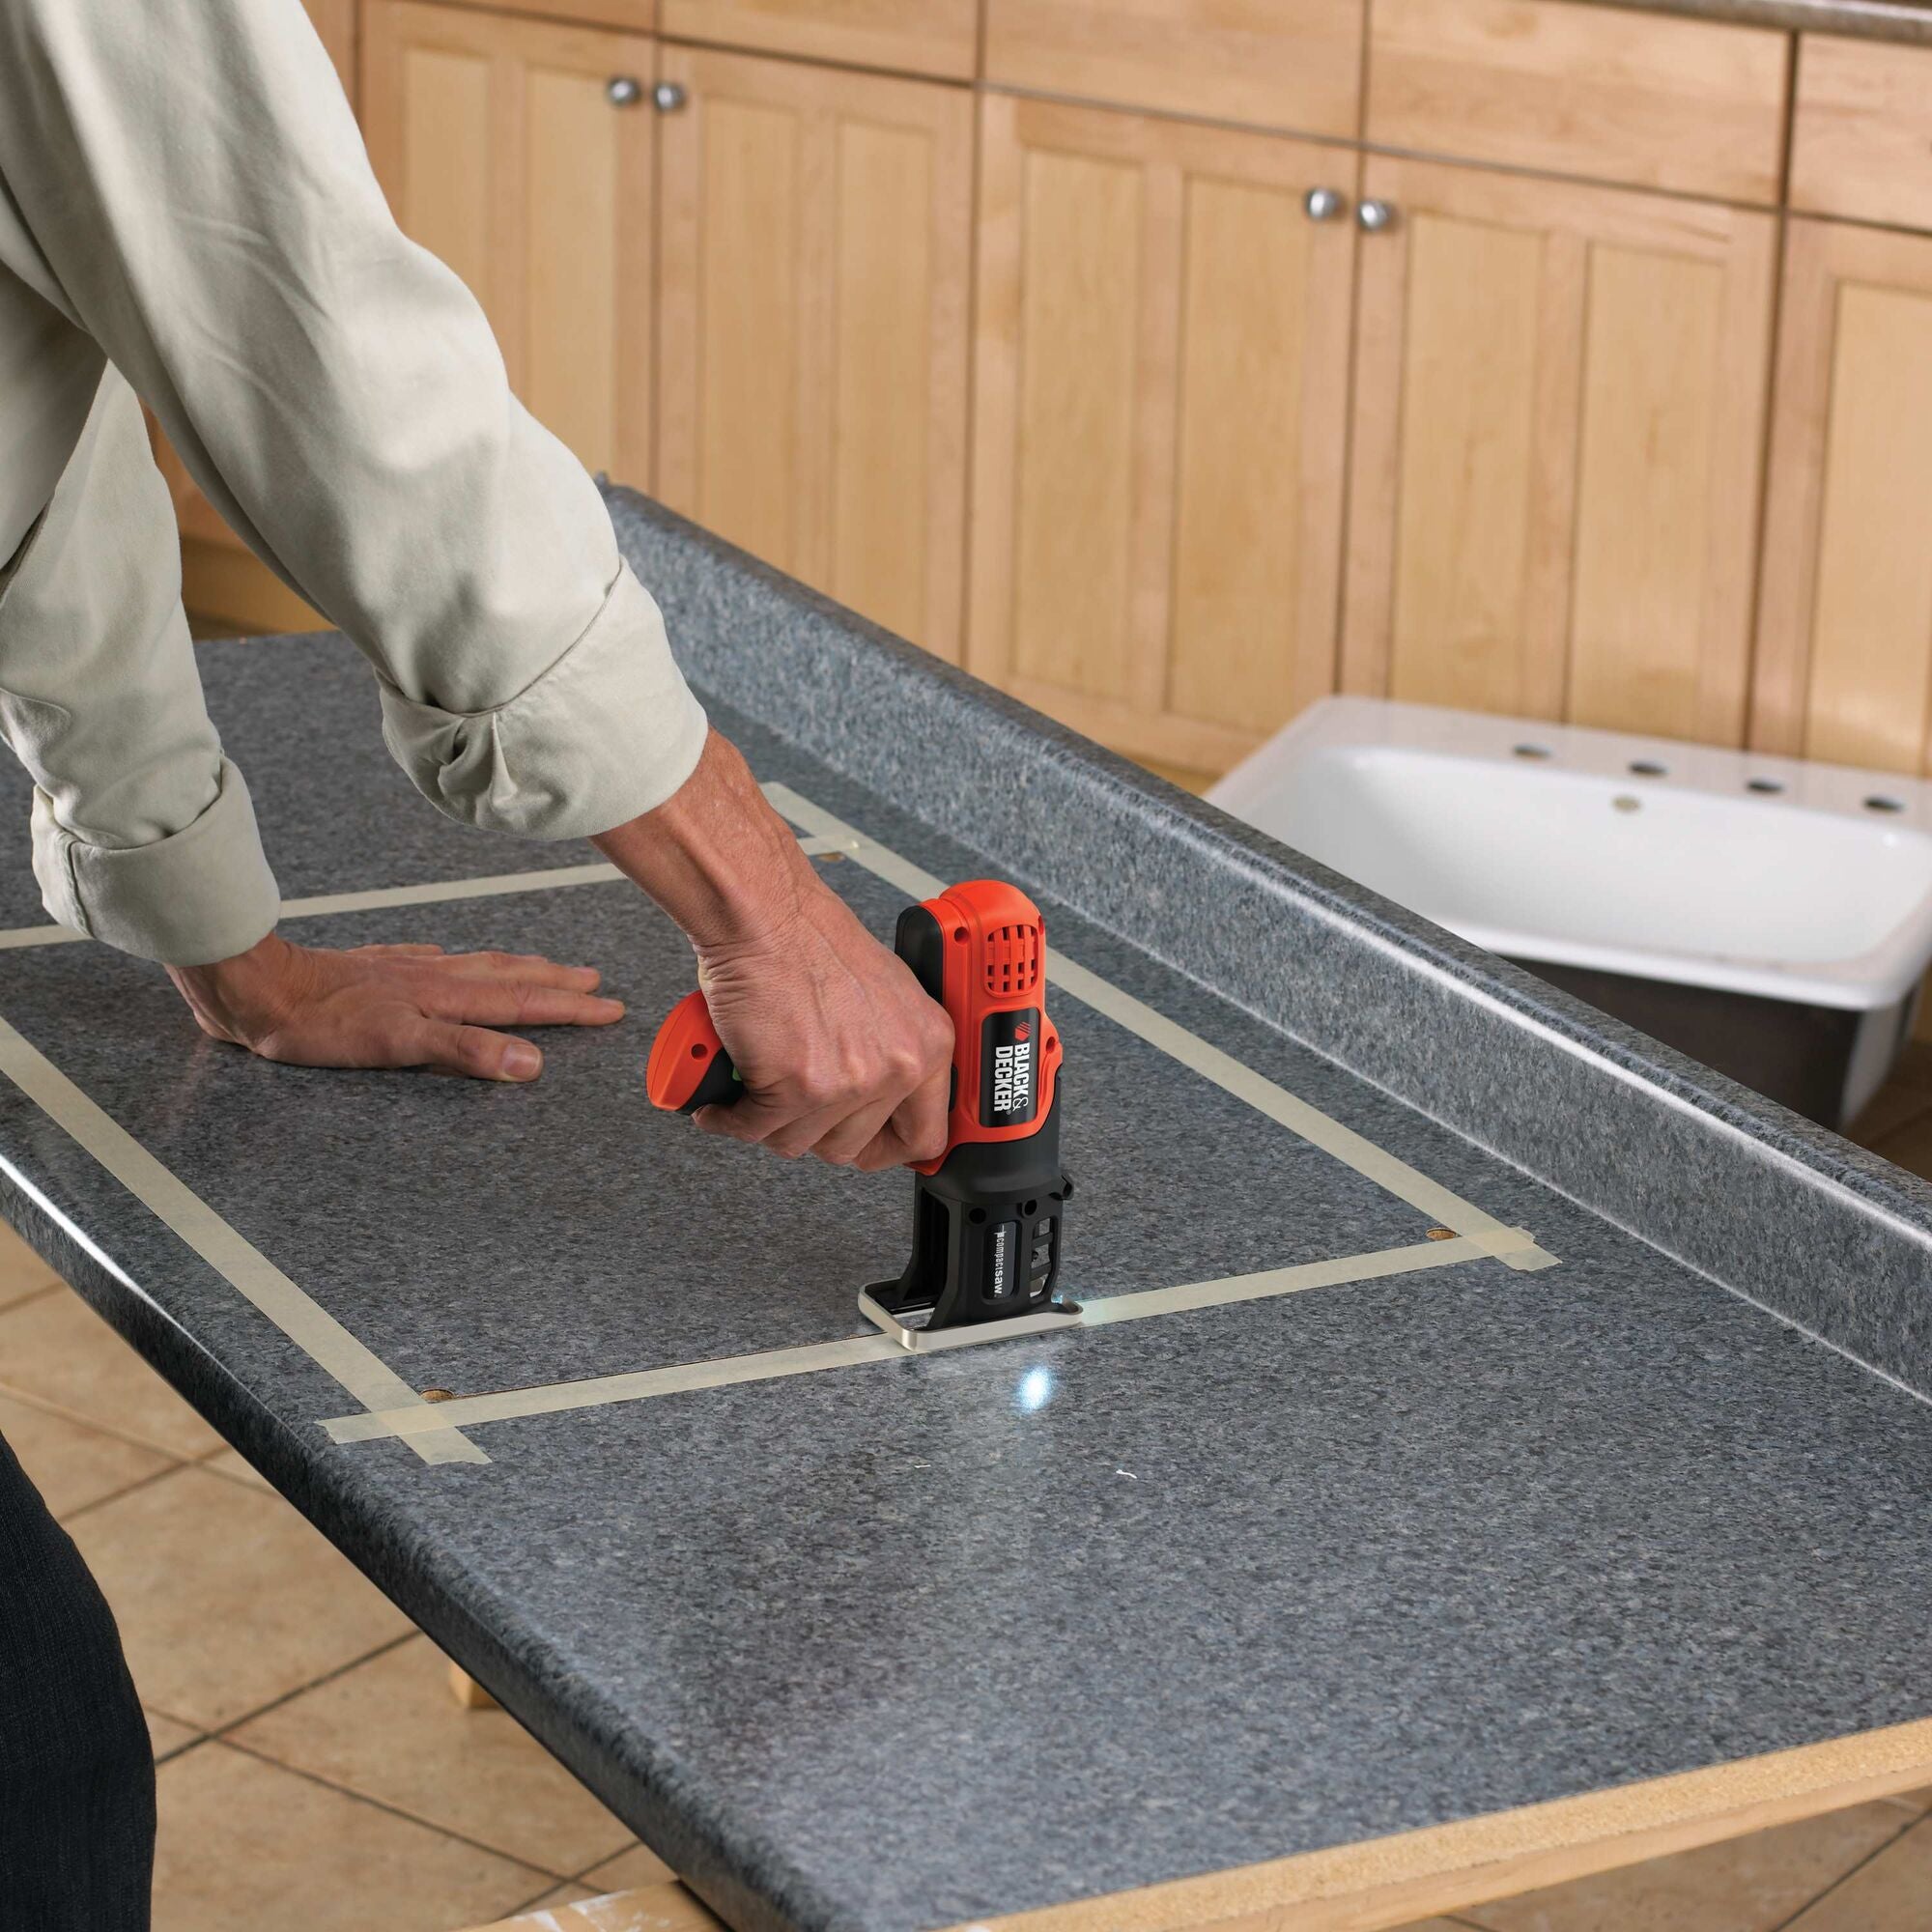 An overview of the BLACK+DECKER Cordless Compact Jig Saw.